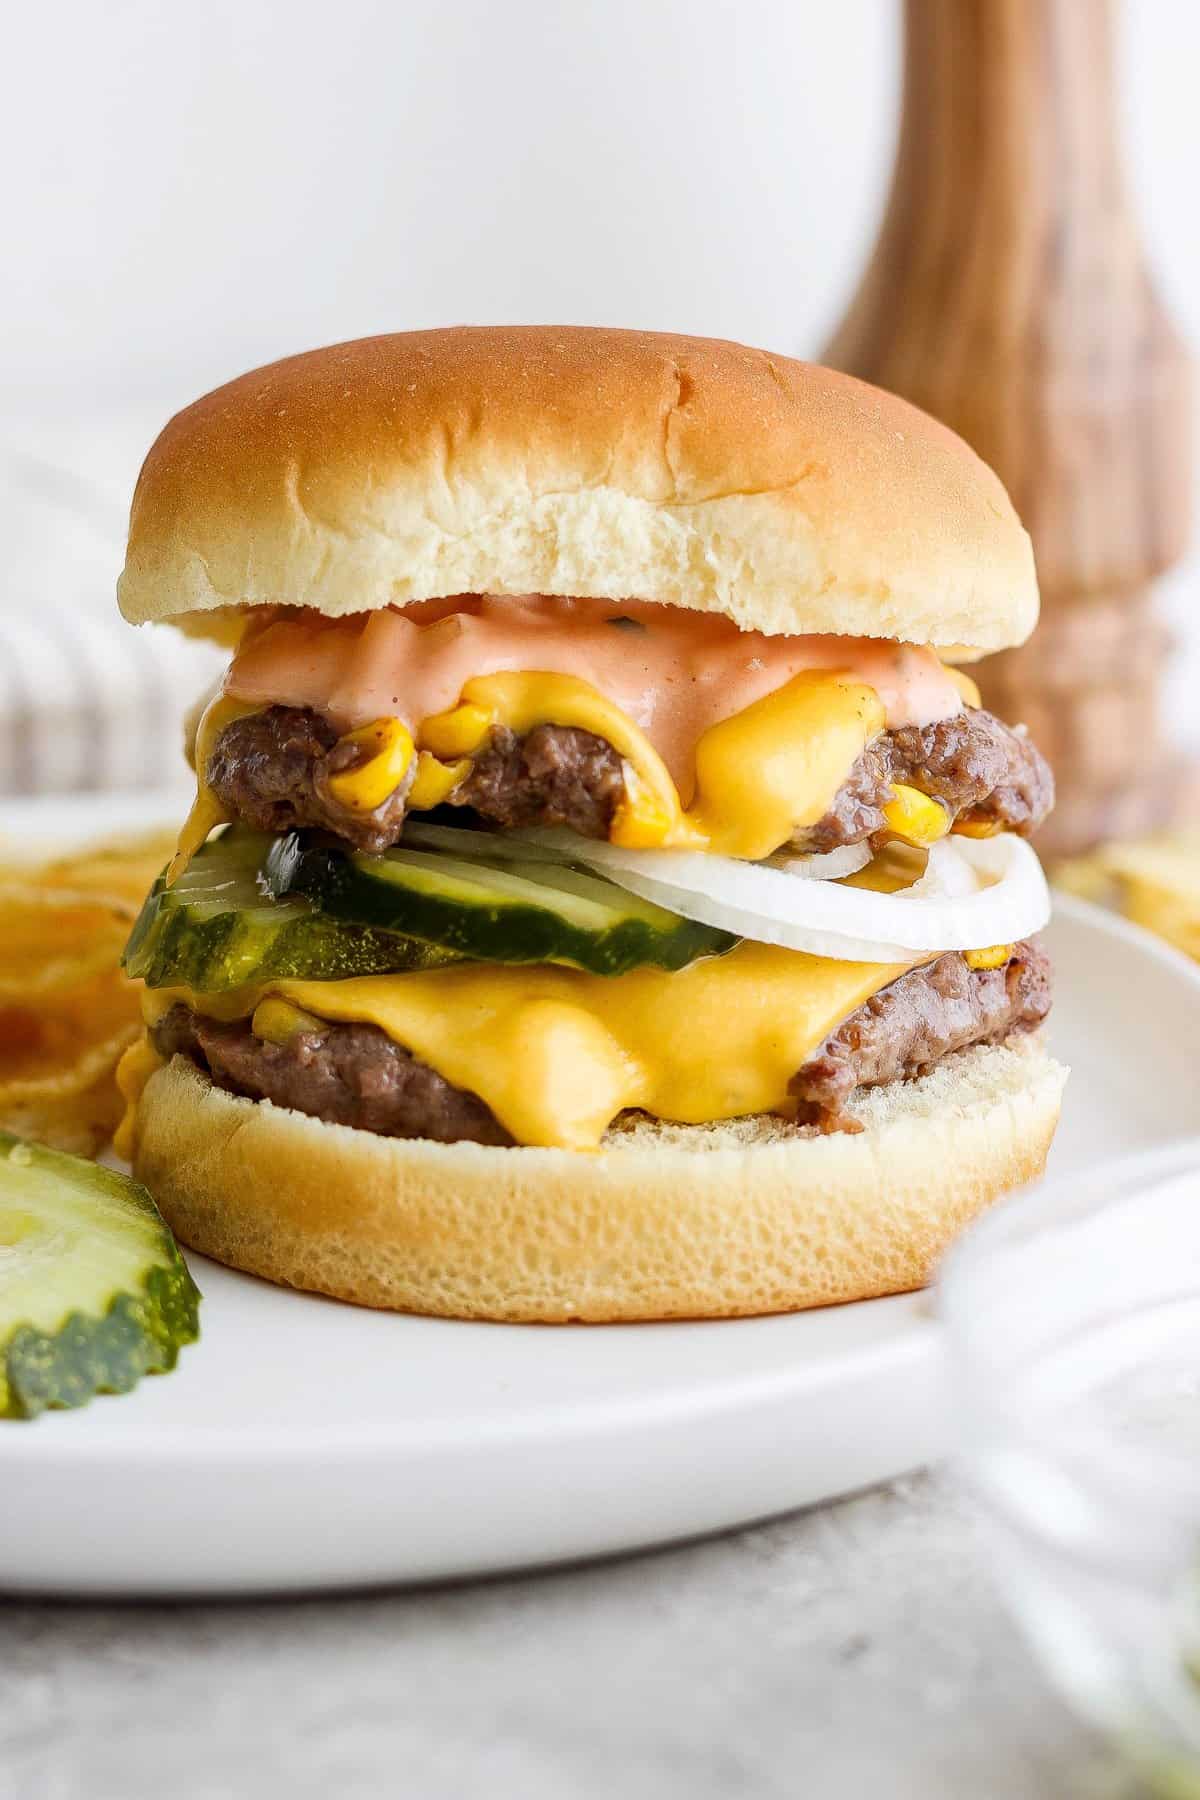 Double cheeseburger with pickles on a white plate.